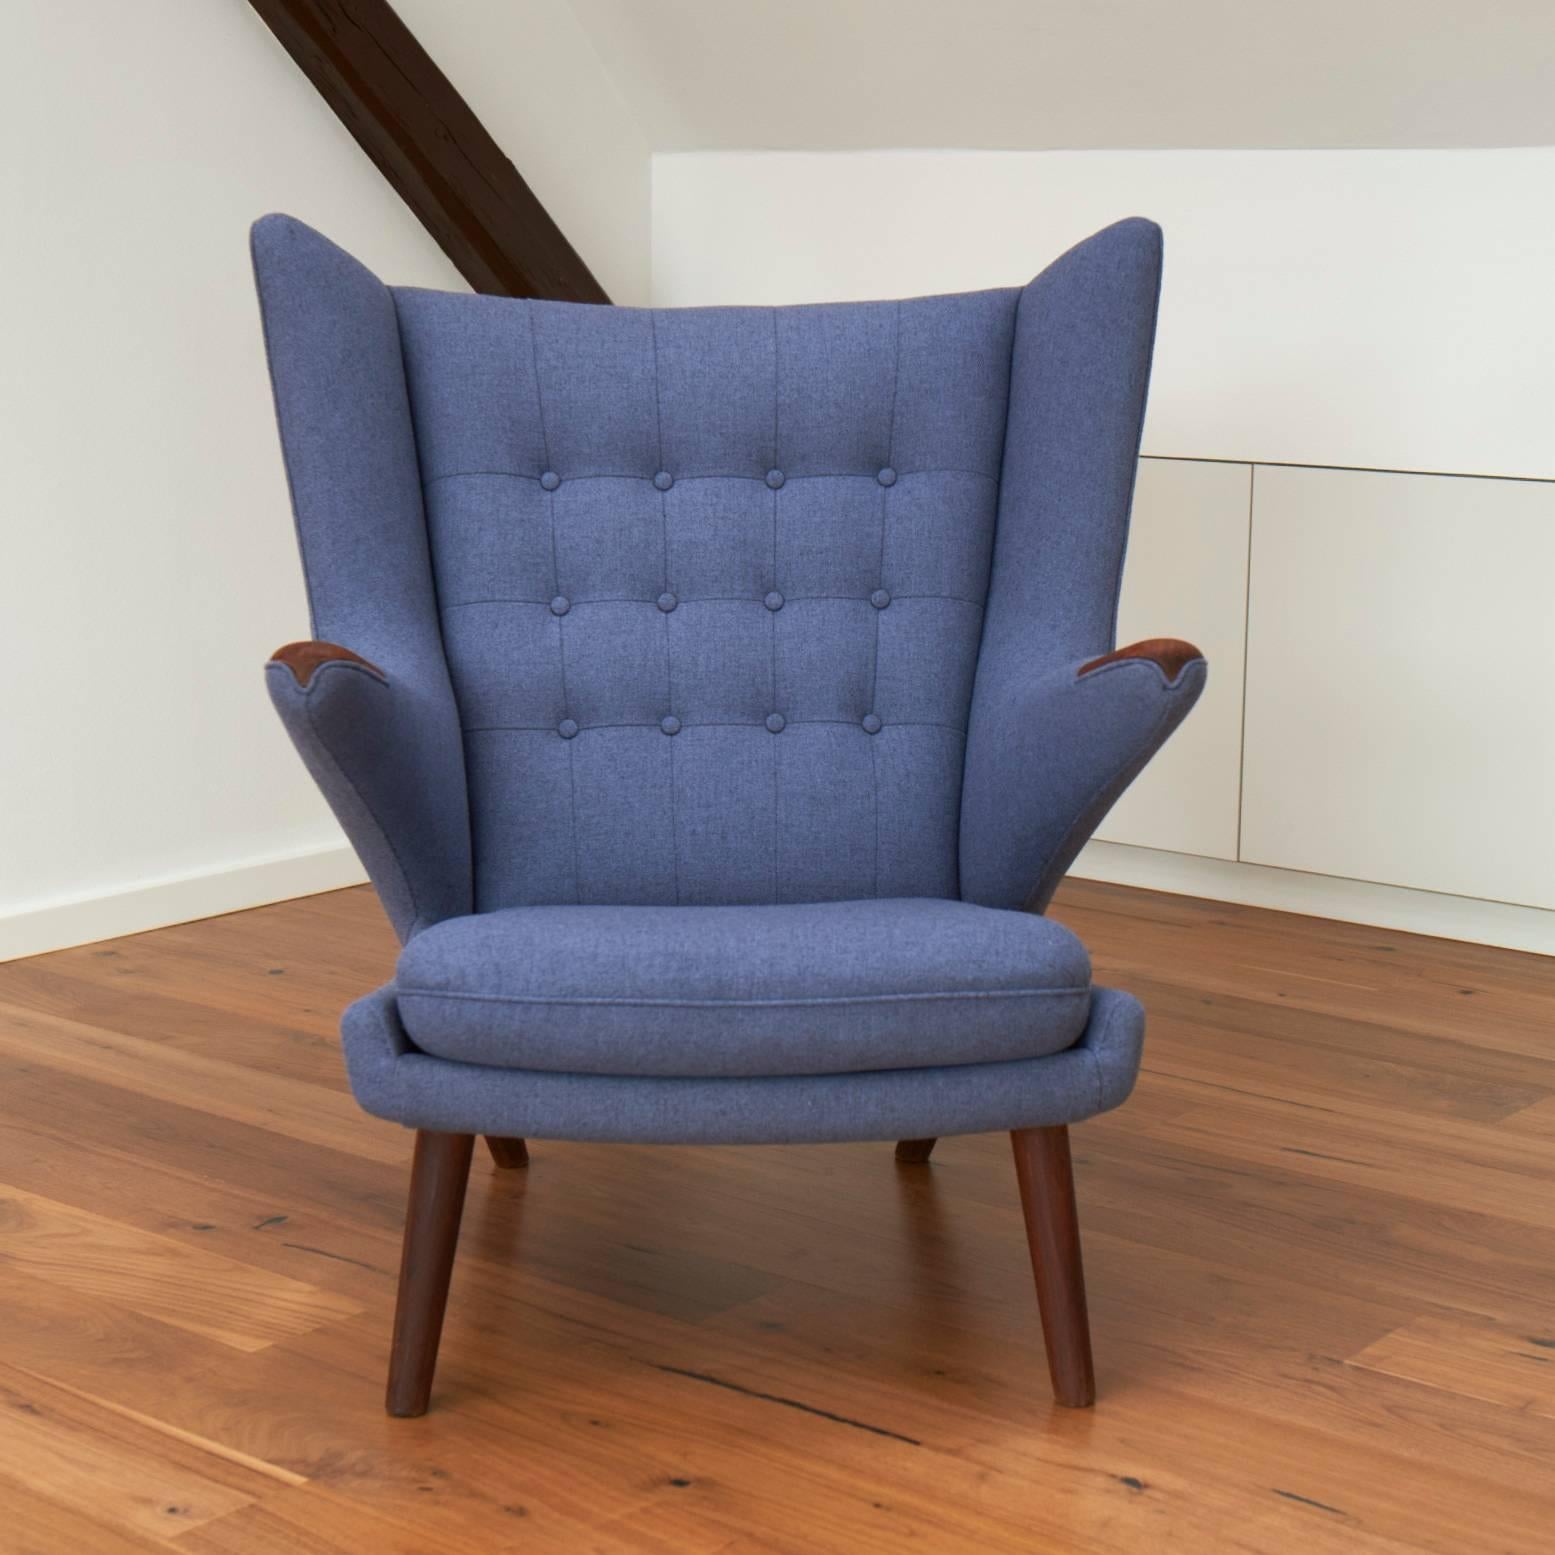 Hans J. Wegner AP19 Papa Bear chair newly upholstered in blue Tonica wool, code 791.
Legs and nails in mahogany.